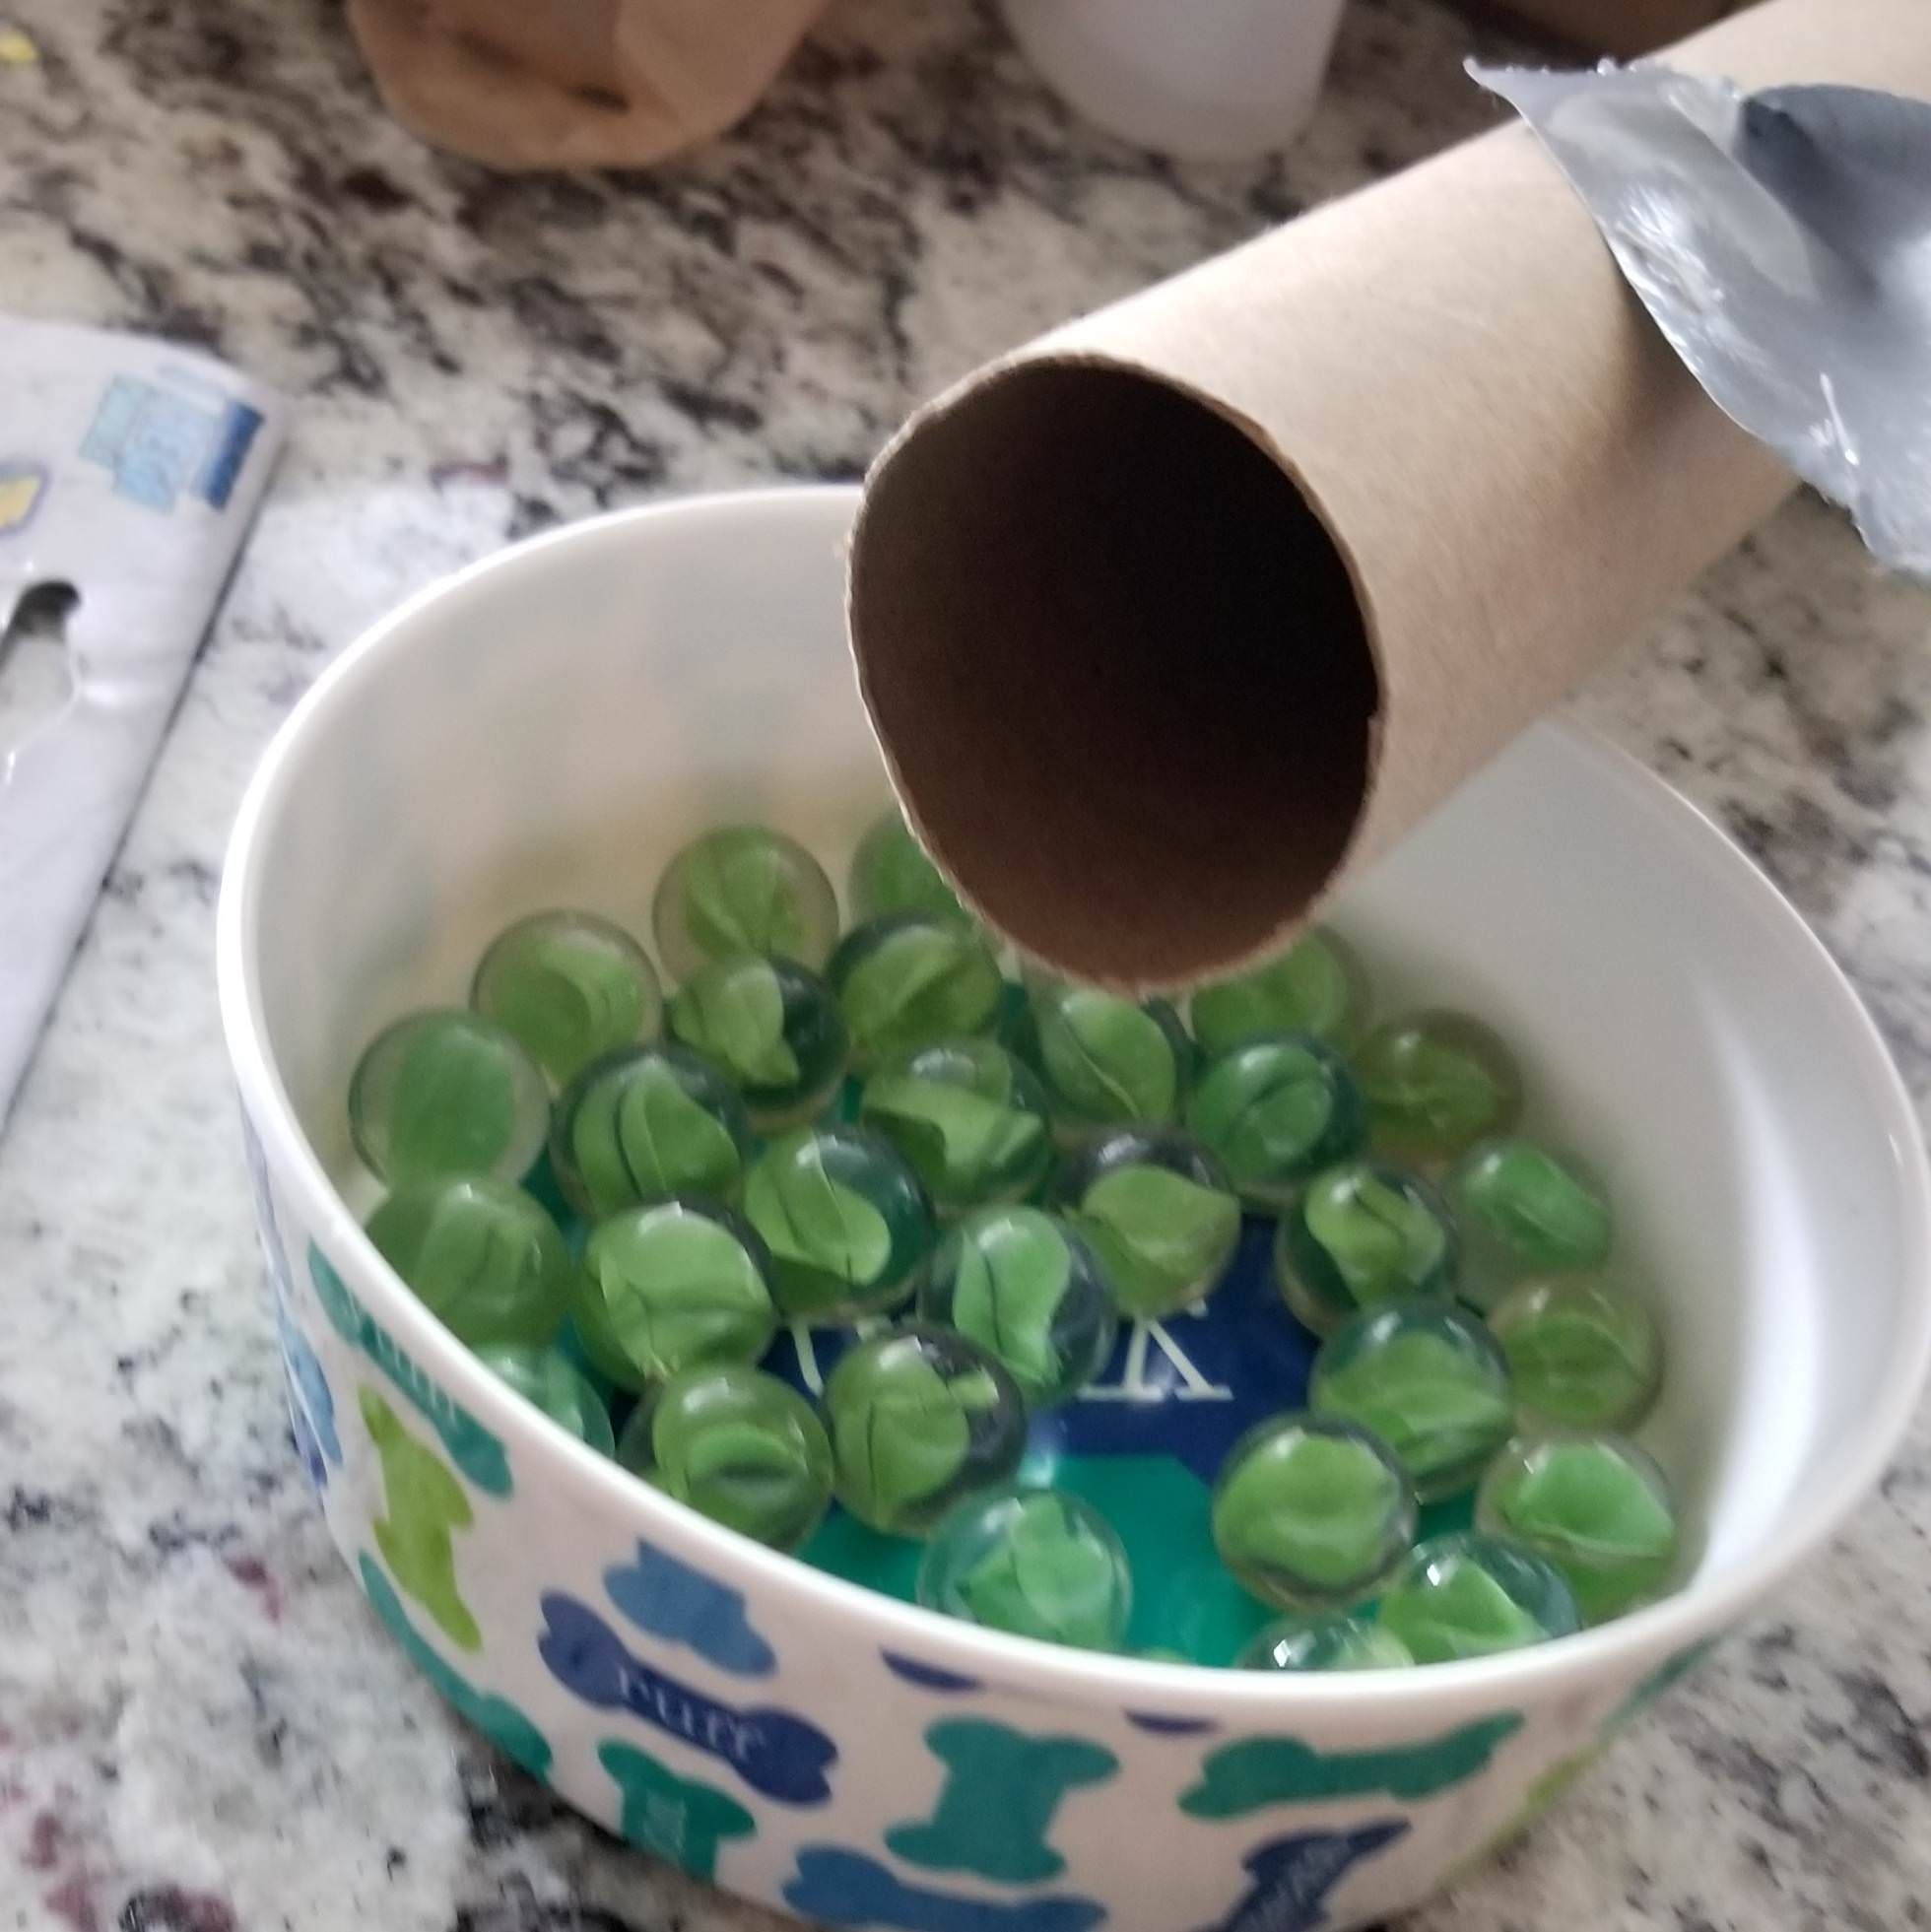 Because my wife likes to shake presents when I'm away, I'm putting a cardboard tube full of marbles in with her gift.